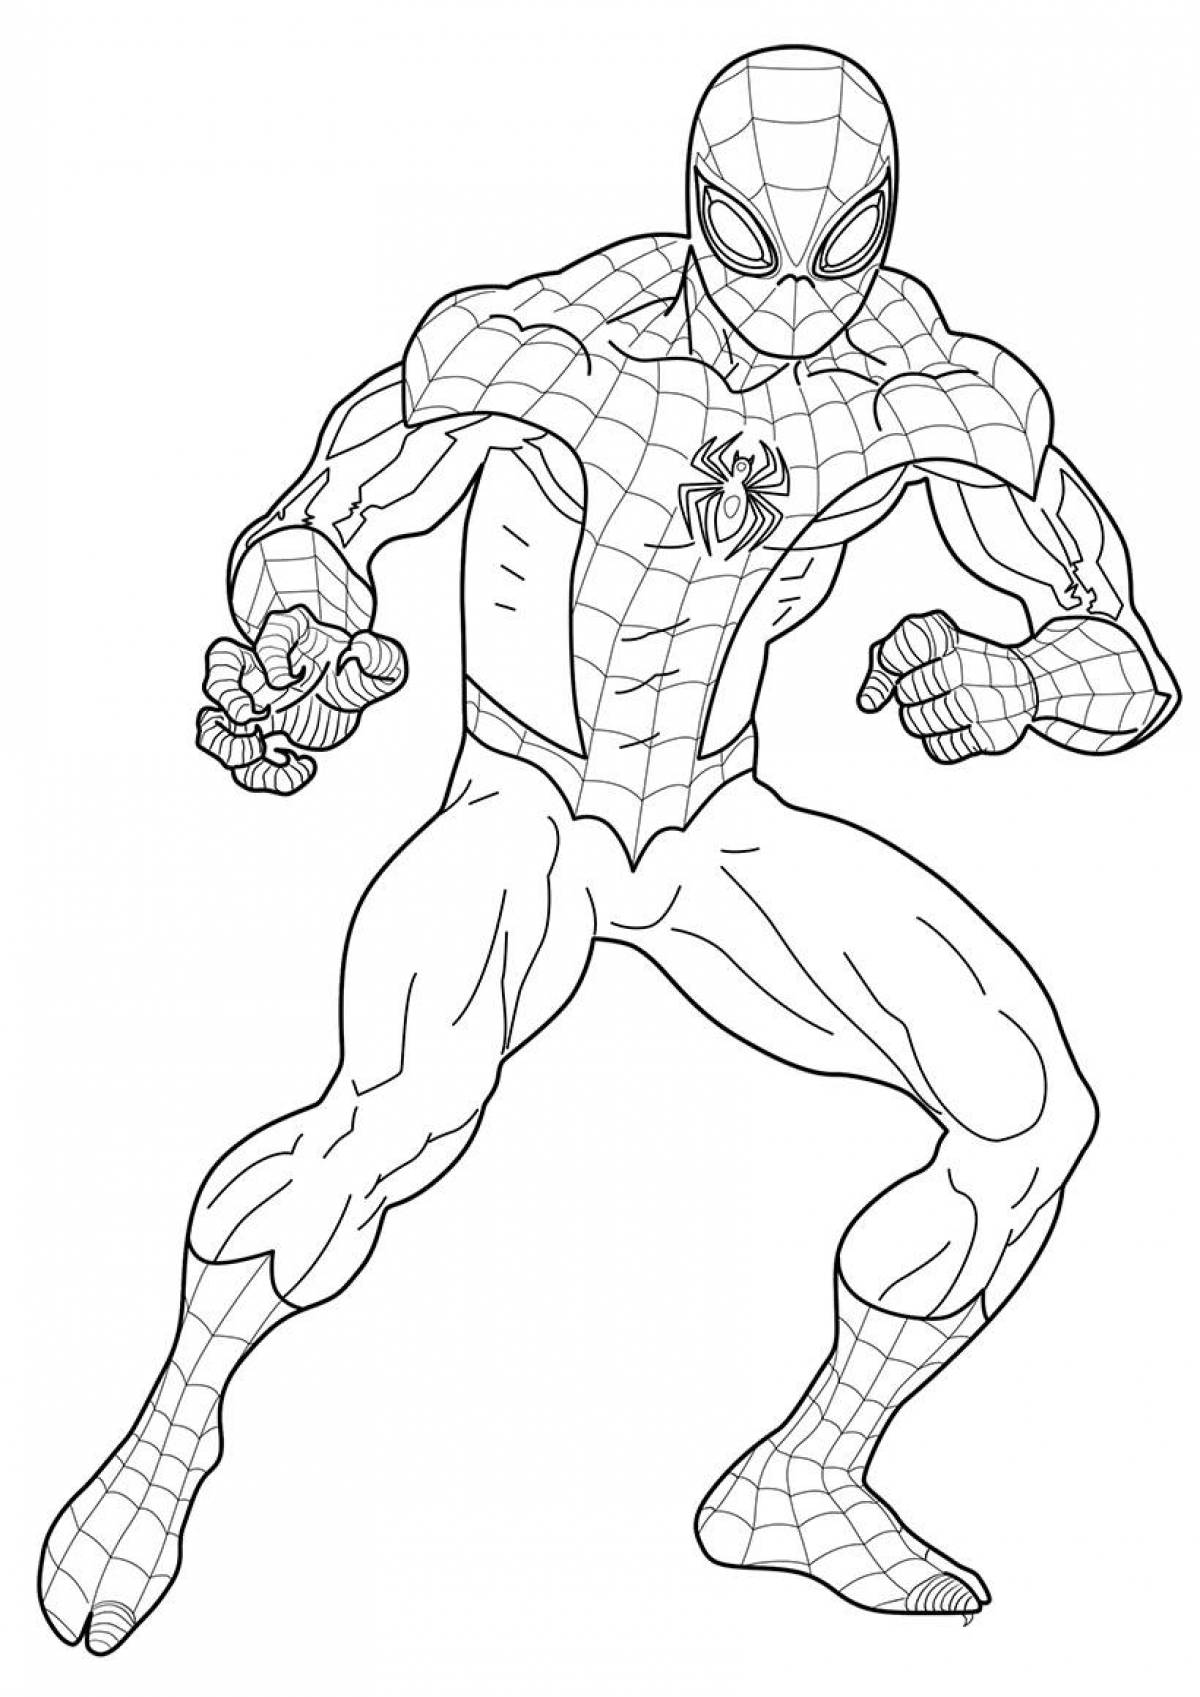 Spiderman's highly detailed coloring page